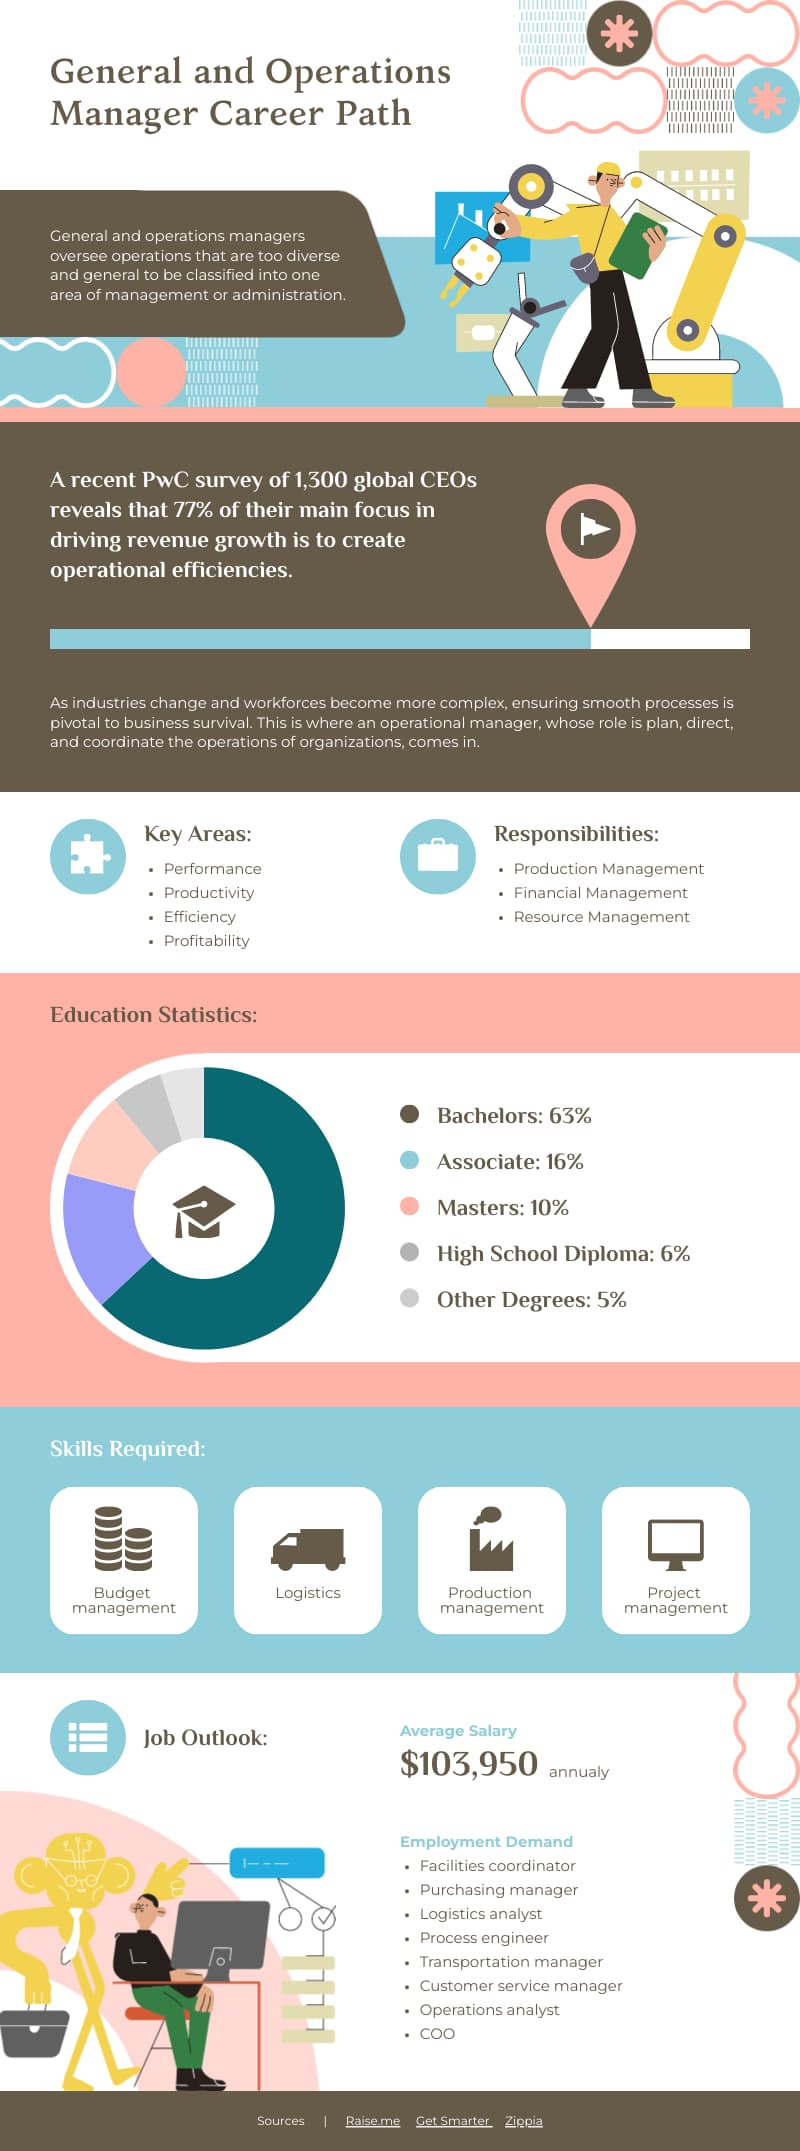 career path infographic template